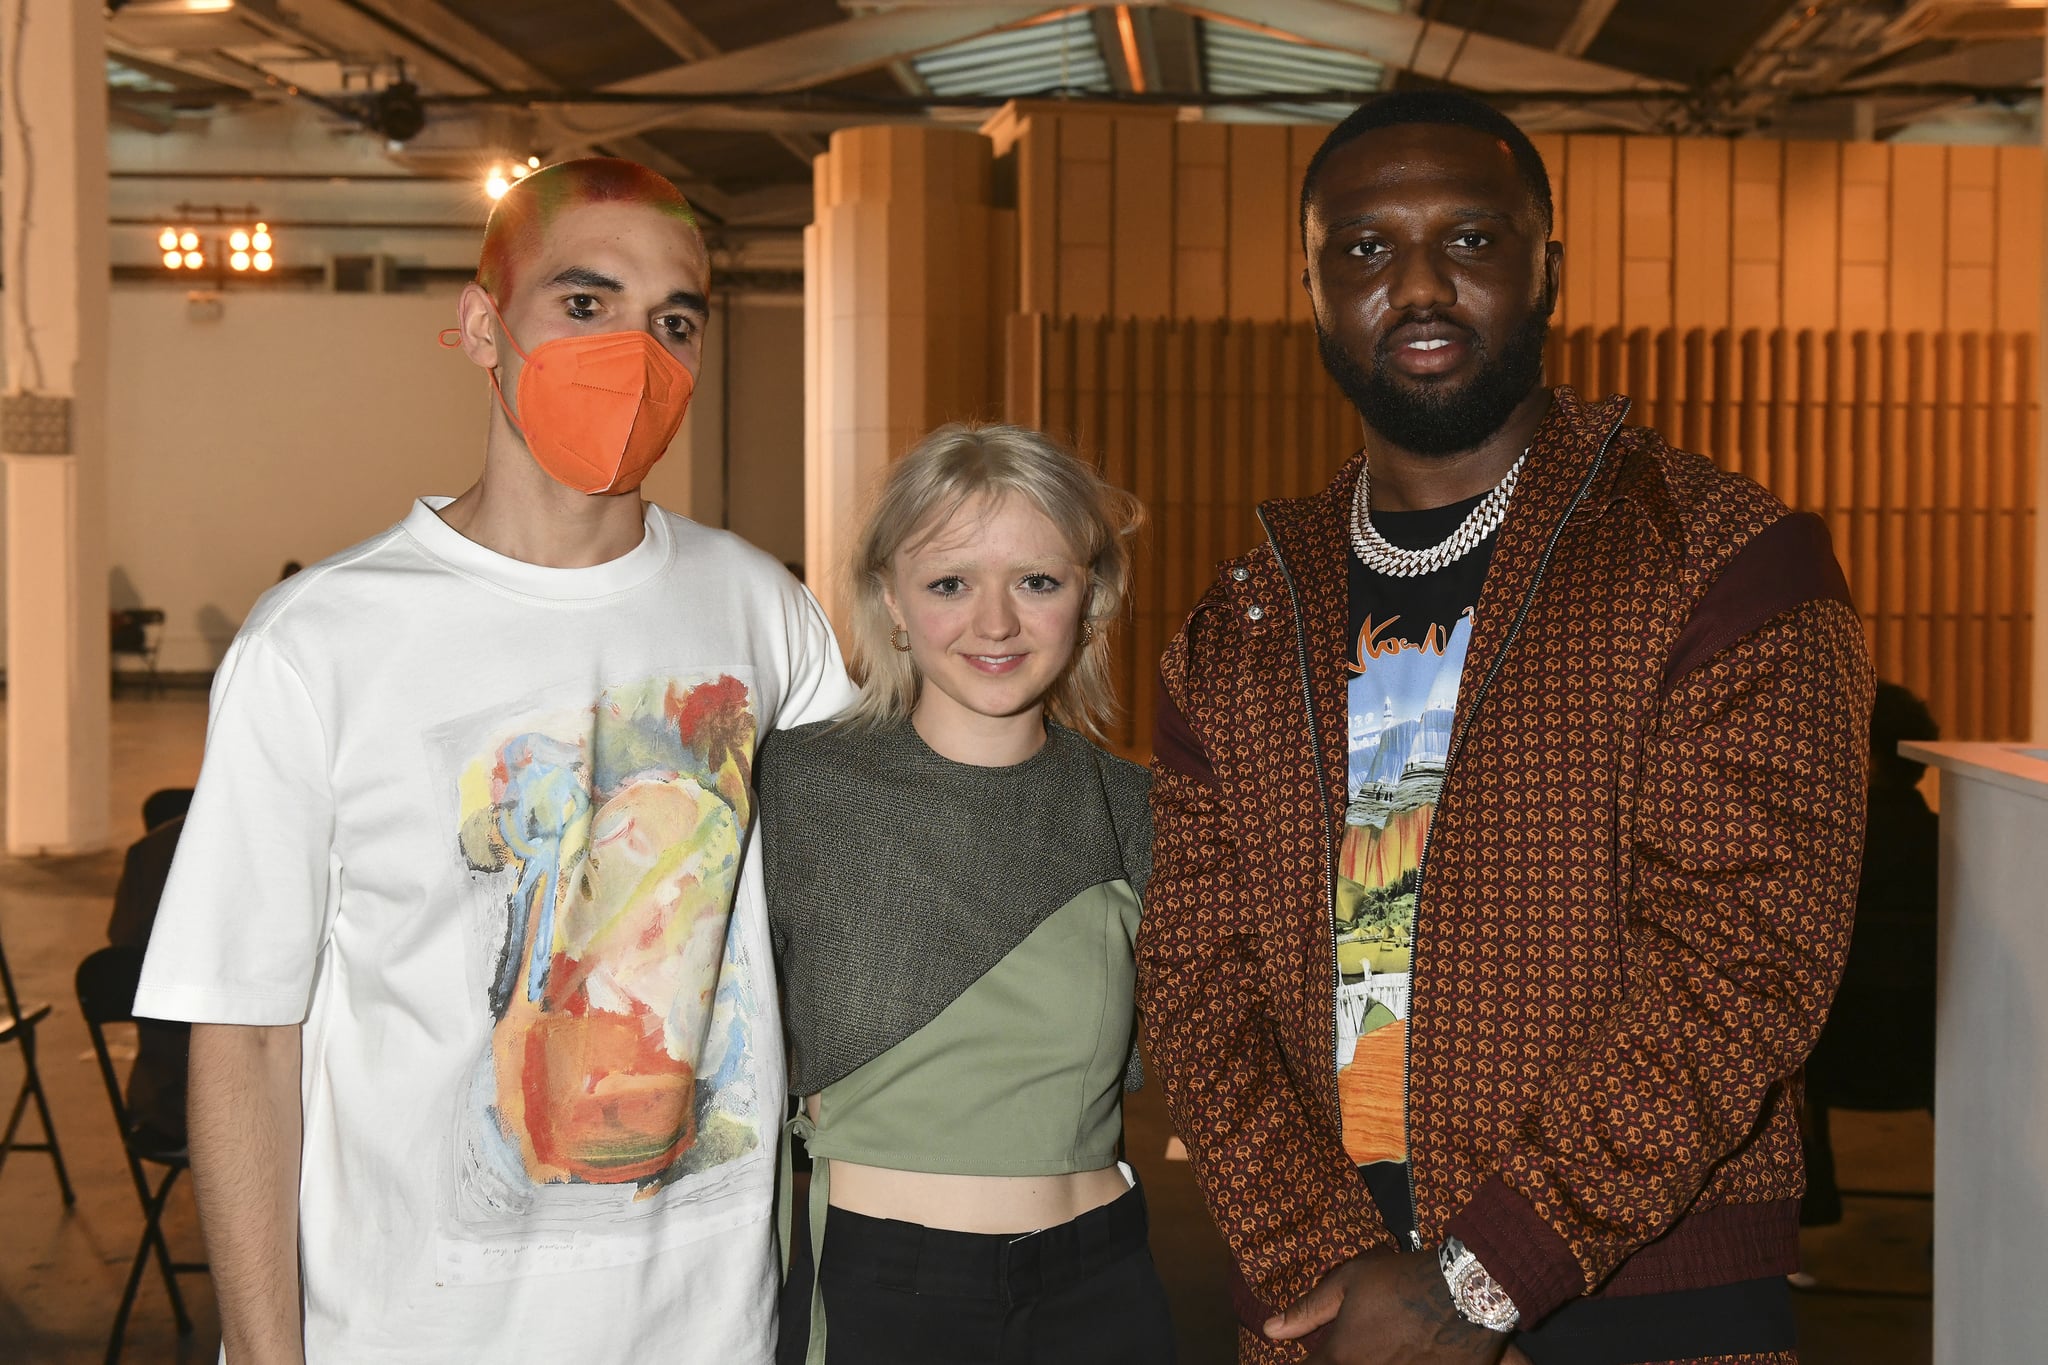 LONDON, ENGLAND - JUNE 12: (L-R) Reuben Selby, Maisie Williams and Headie One attend the Reuben Selby show during London Fashion Week June 2021 on June 12, 2021 in London, England. (Photo by David M. Benett/Dave Benett/Getty Images)